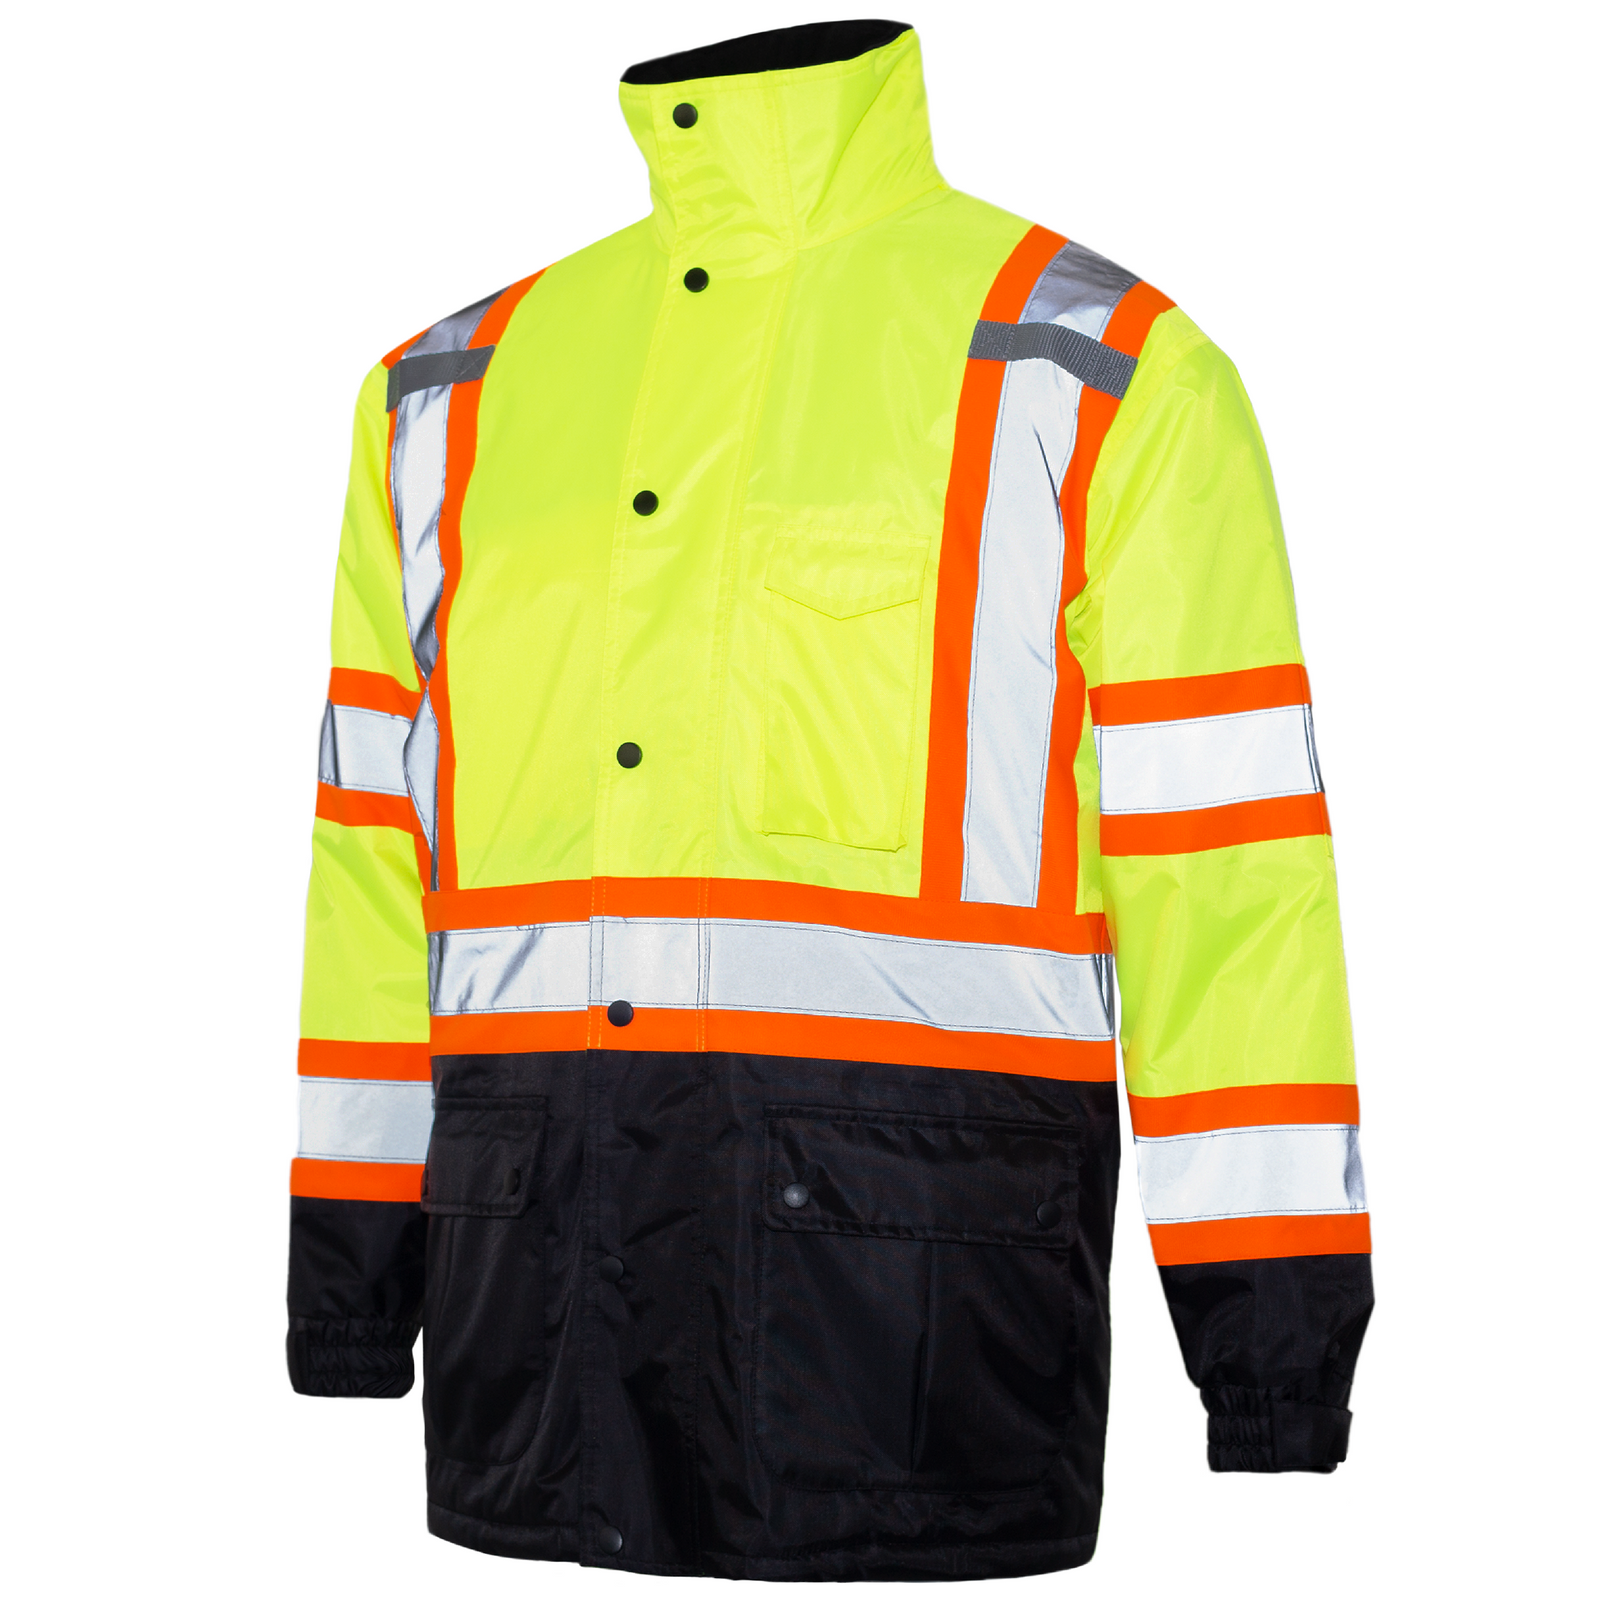 Yellow hi-vis safety insulated jacket with reflective stripes and X on back